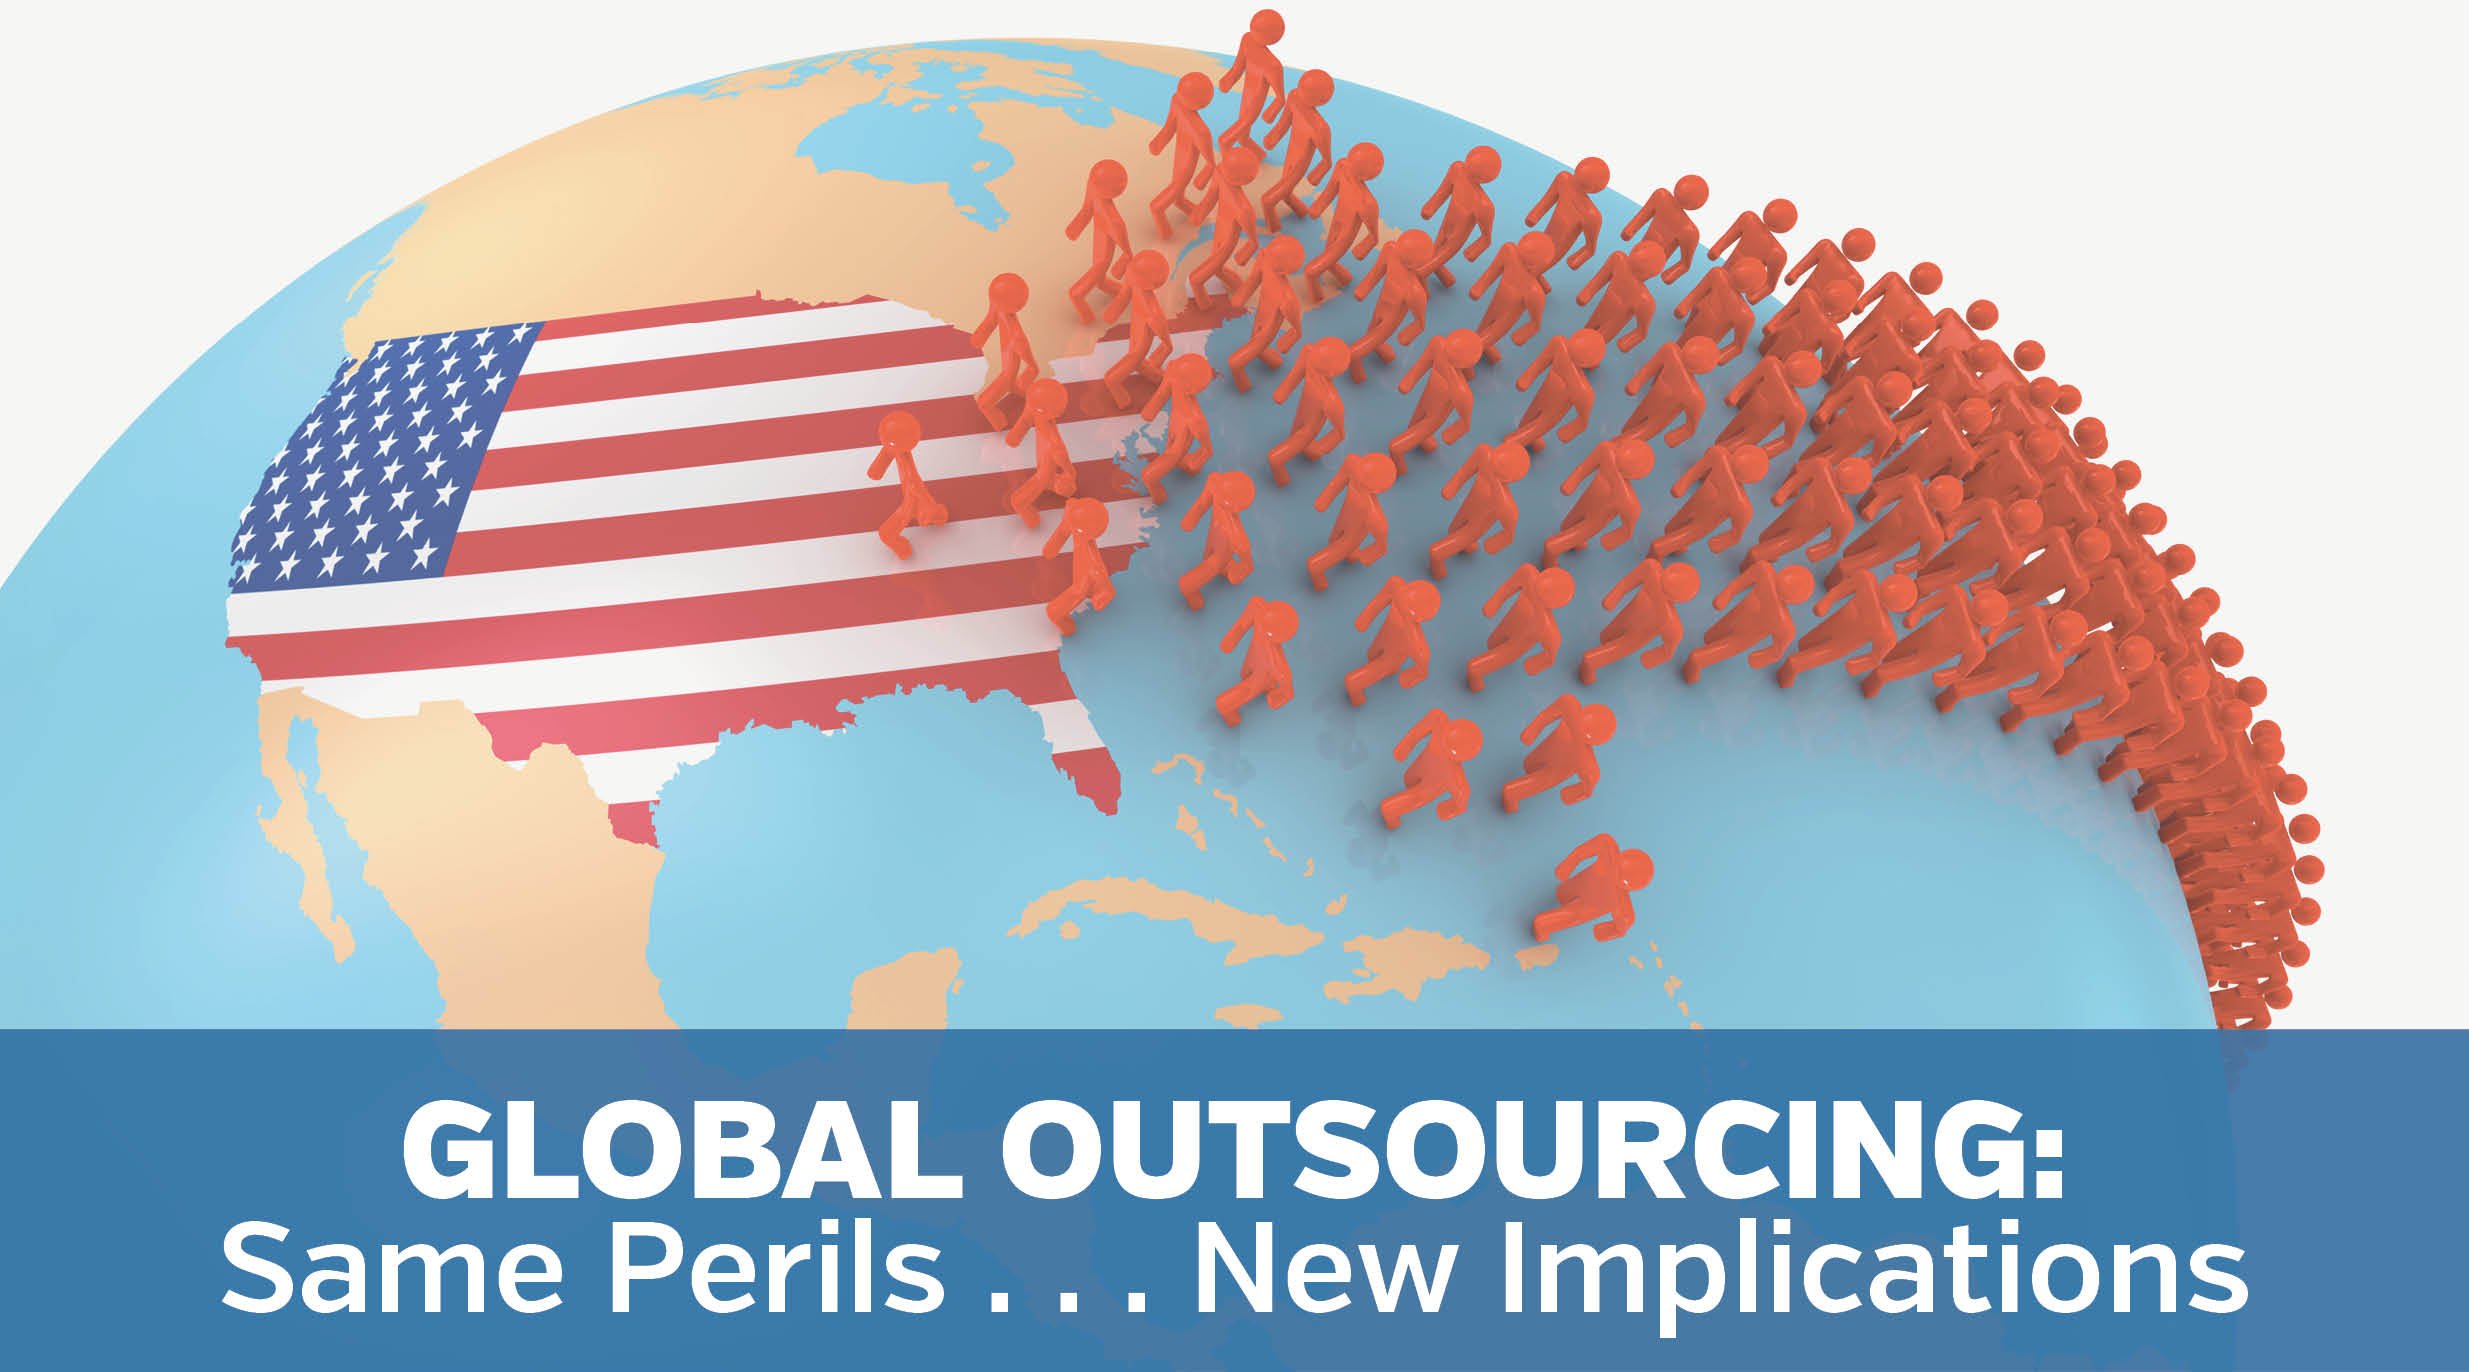 Global Outsourcing, Same Perils, New Implications - updated.jpg